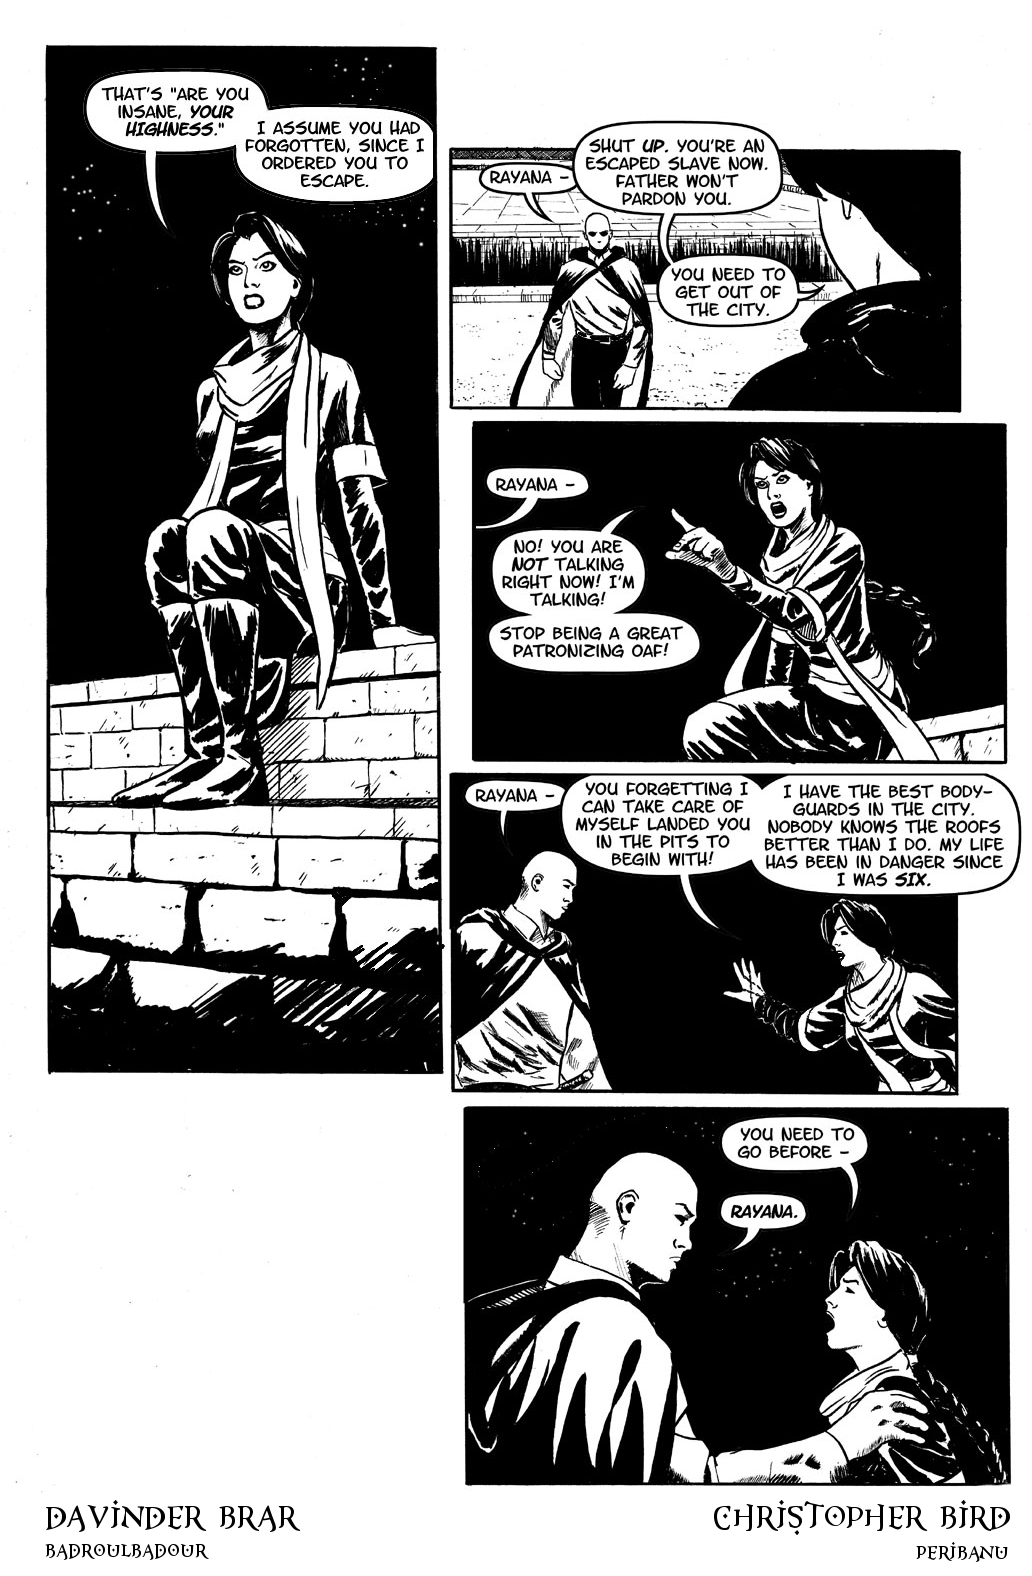 Book 4, page 5